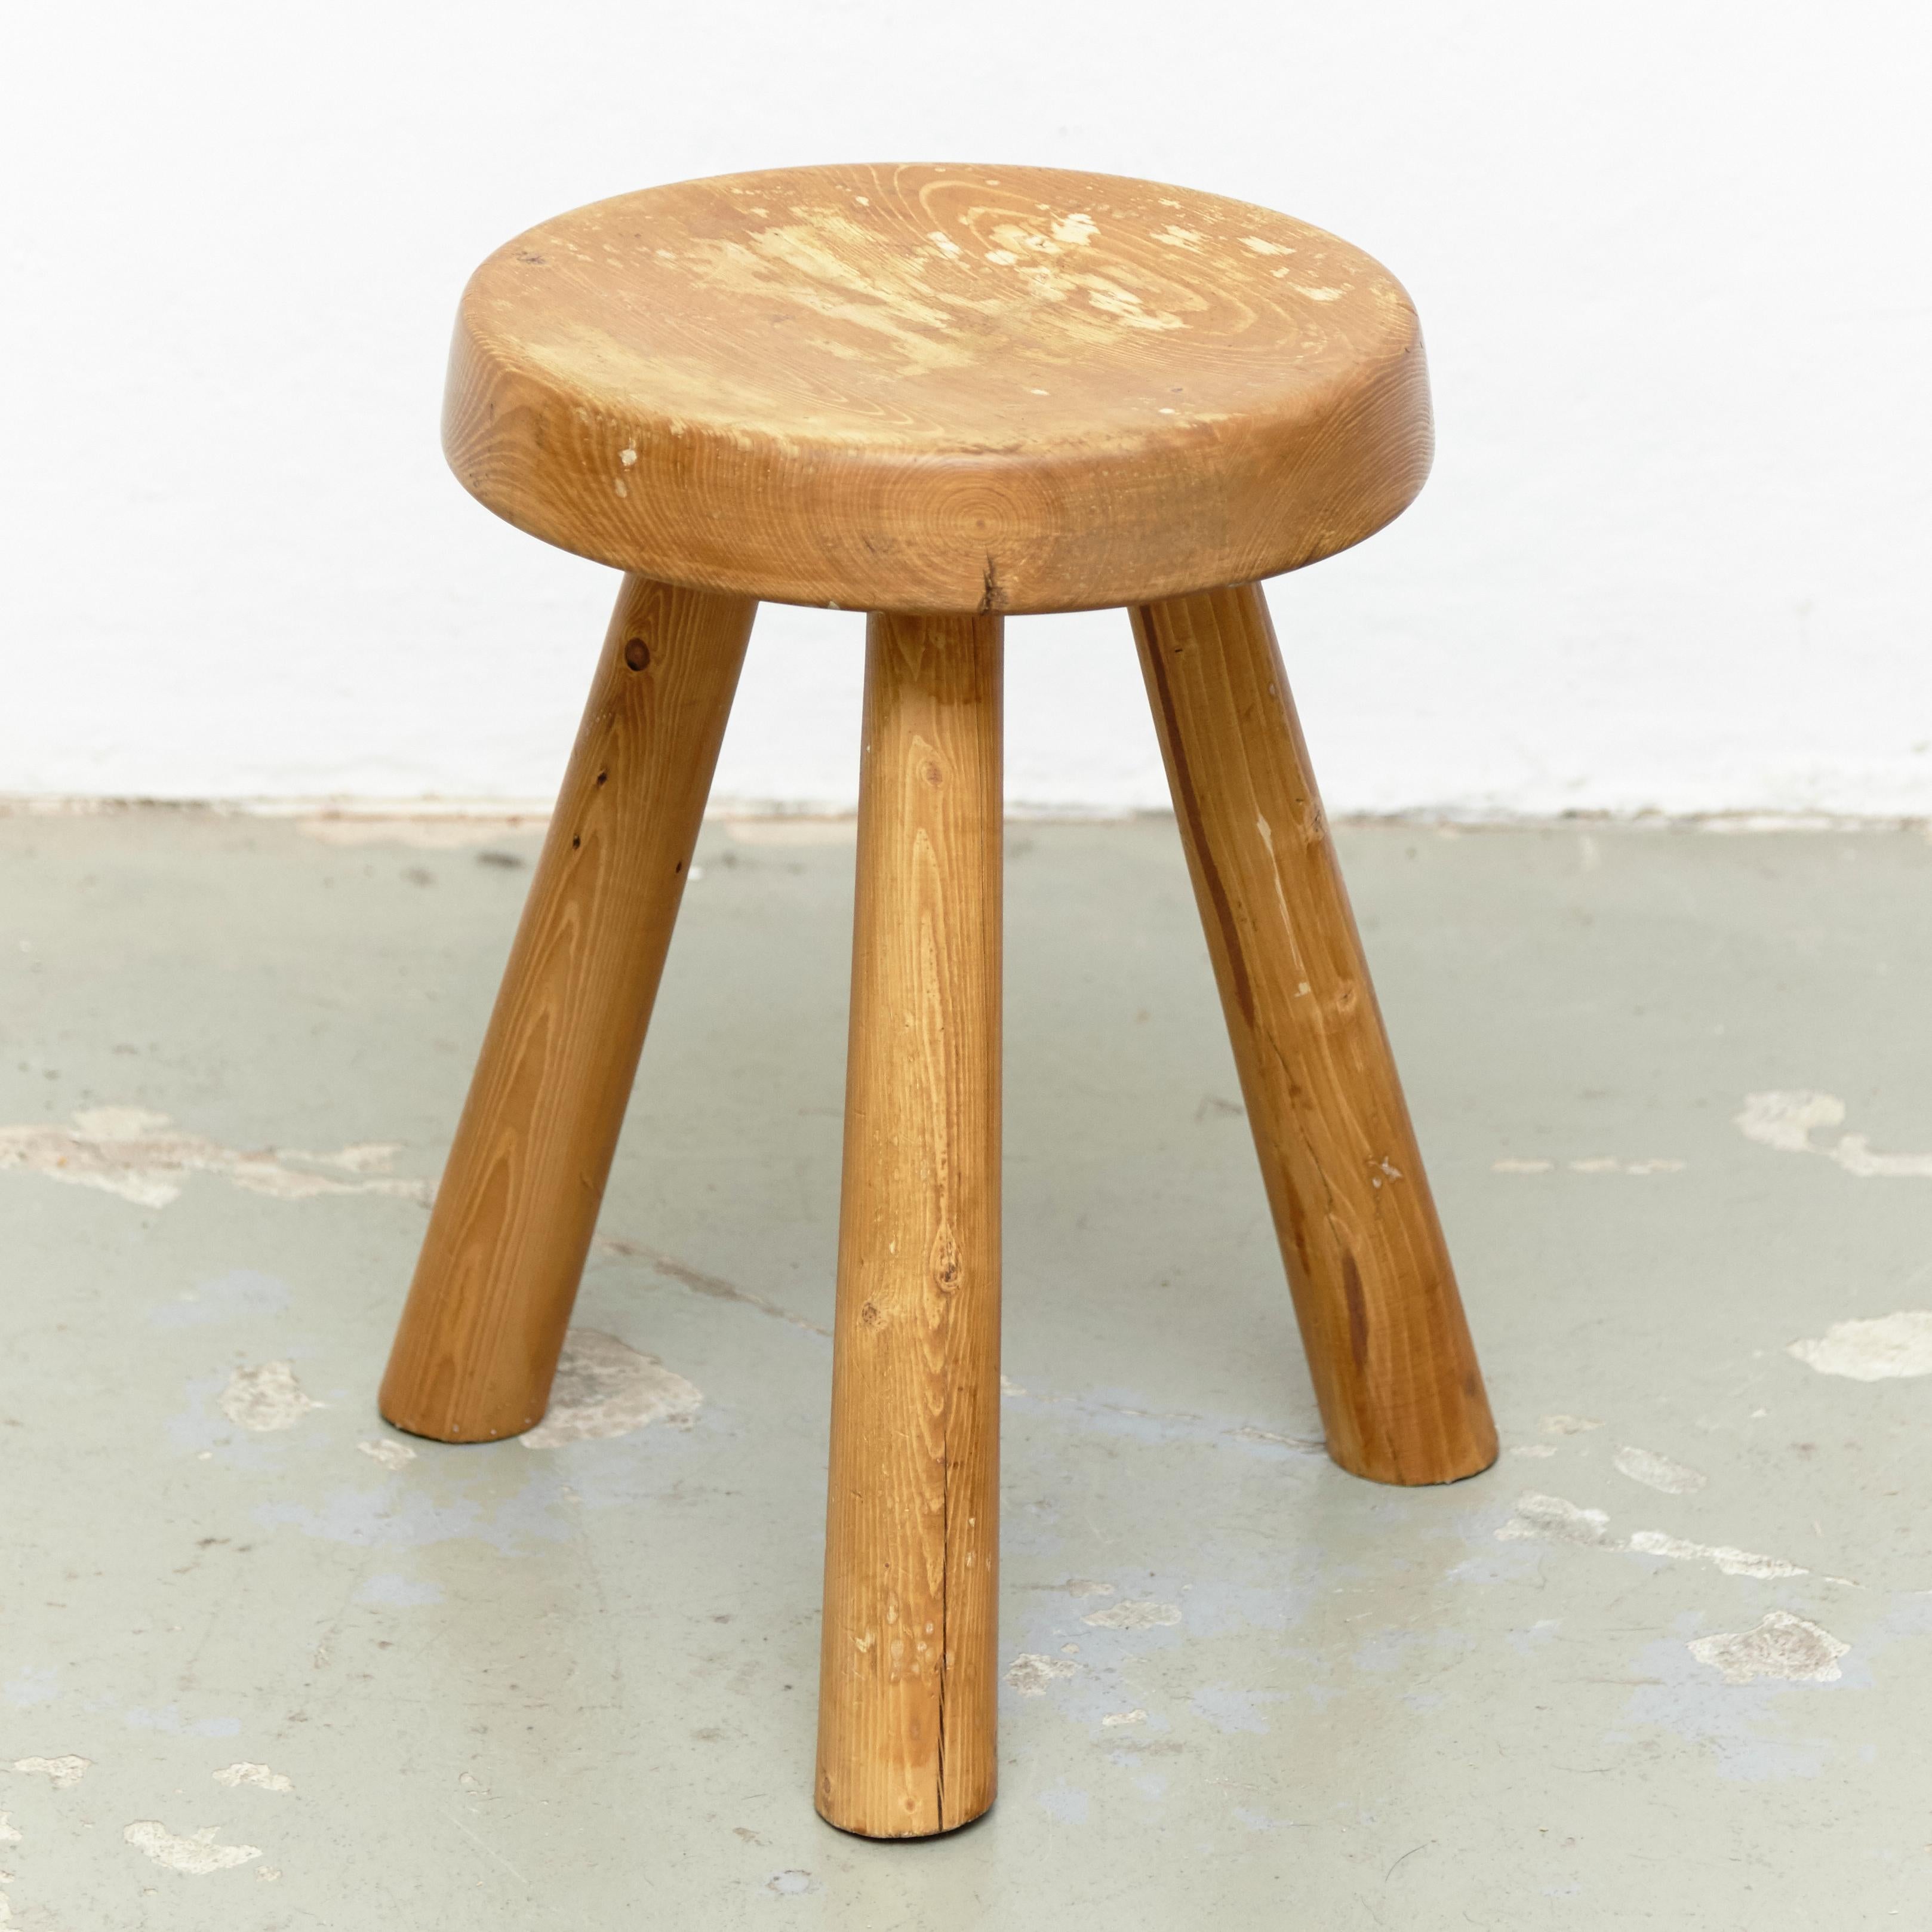 Stool designed by Charlotte Perriand, circa 1960 for Les Arcs.
Manufactured in France.
Pine wood seat.

In good original condition, preserving a beautiful patina. 

Charlotte Perriand (1903-1999) She was born in Paris in 1903 and attended the